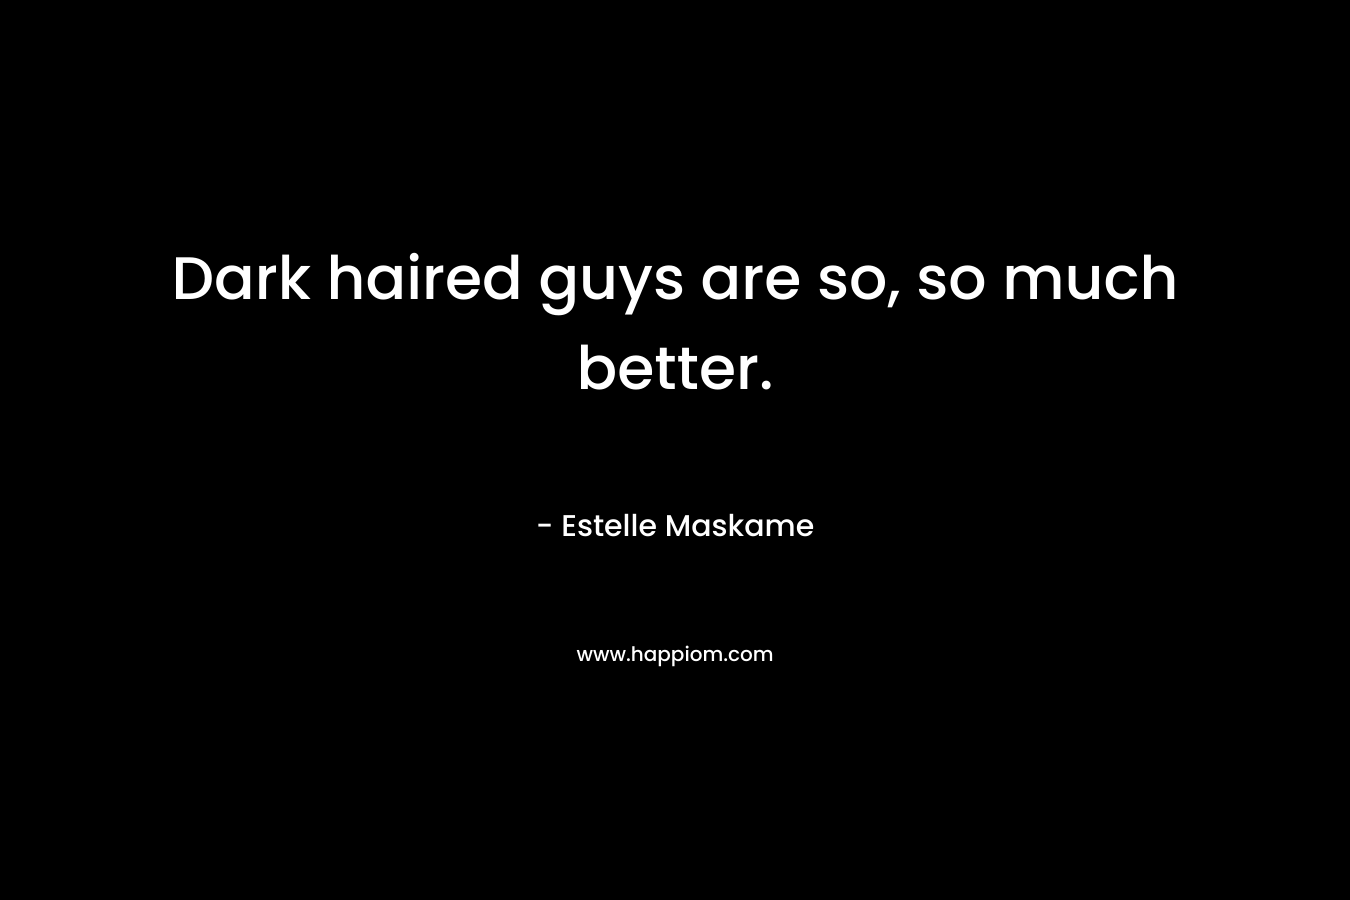 Dark haired guys are so, so much better.